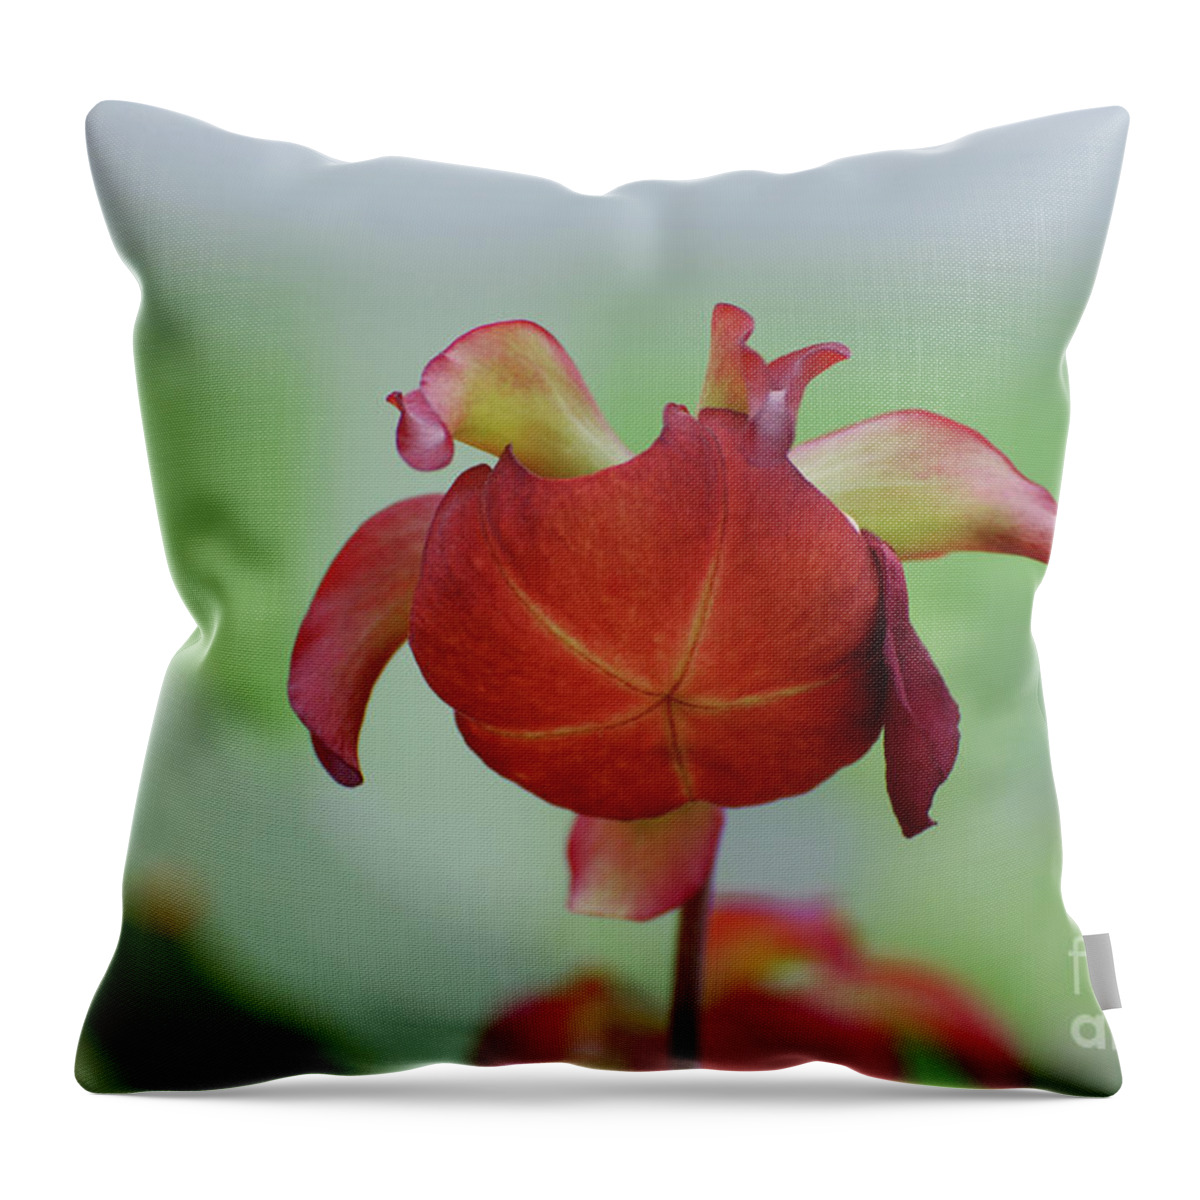 Pitcher Plant Throw Pillow featuring the photograph Flowering Red Adam's Pitcher Plant by DejaVu Designs